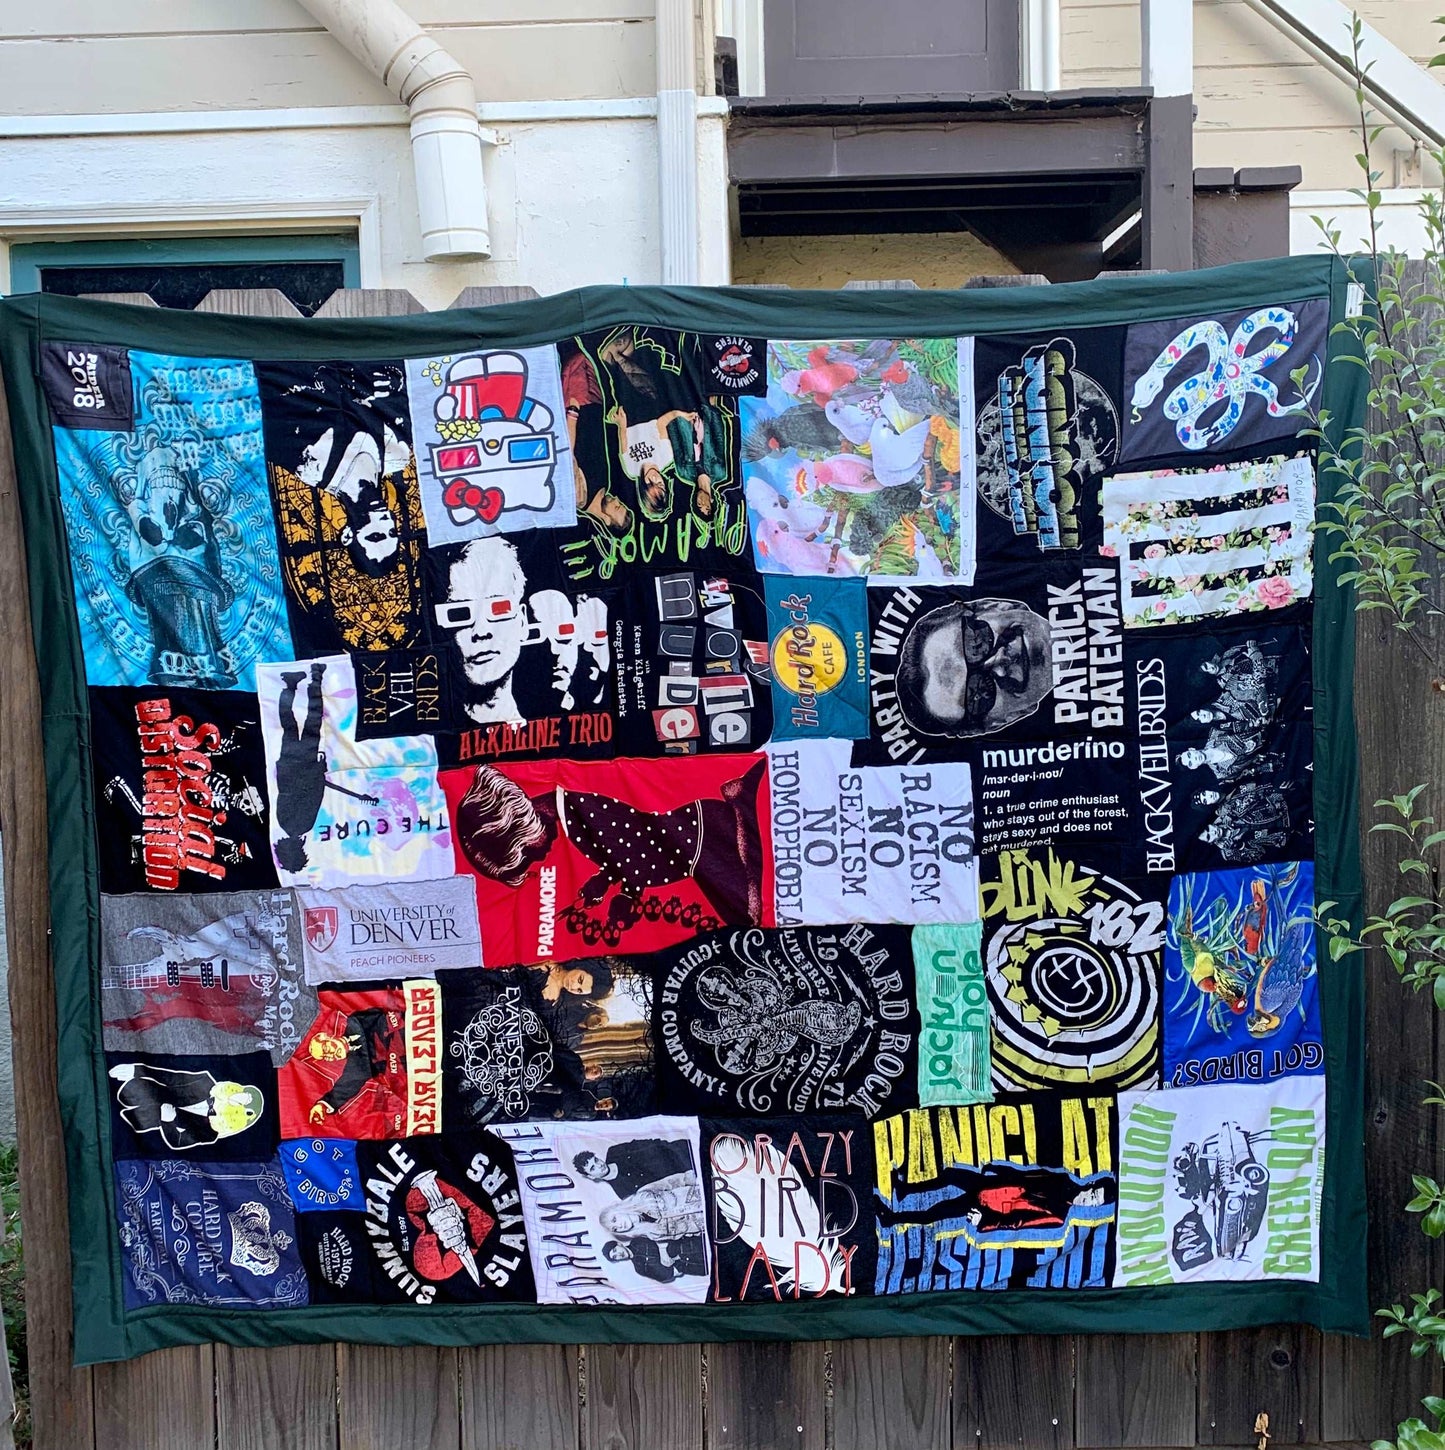 A very large twin sized tshirt quilt, hung up on a fence railing outside, featuring various bands: green day, panic at the disco, social distortion, alkaline trio, the cure, black veil brides 